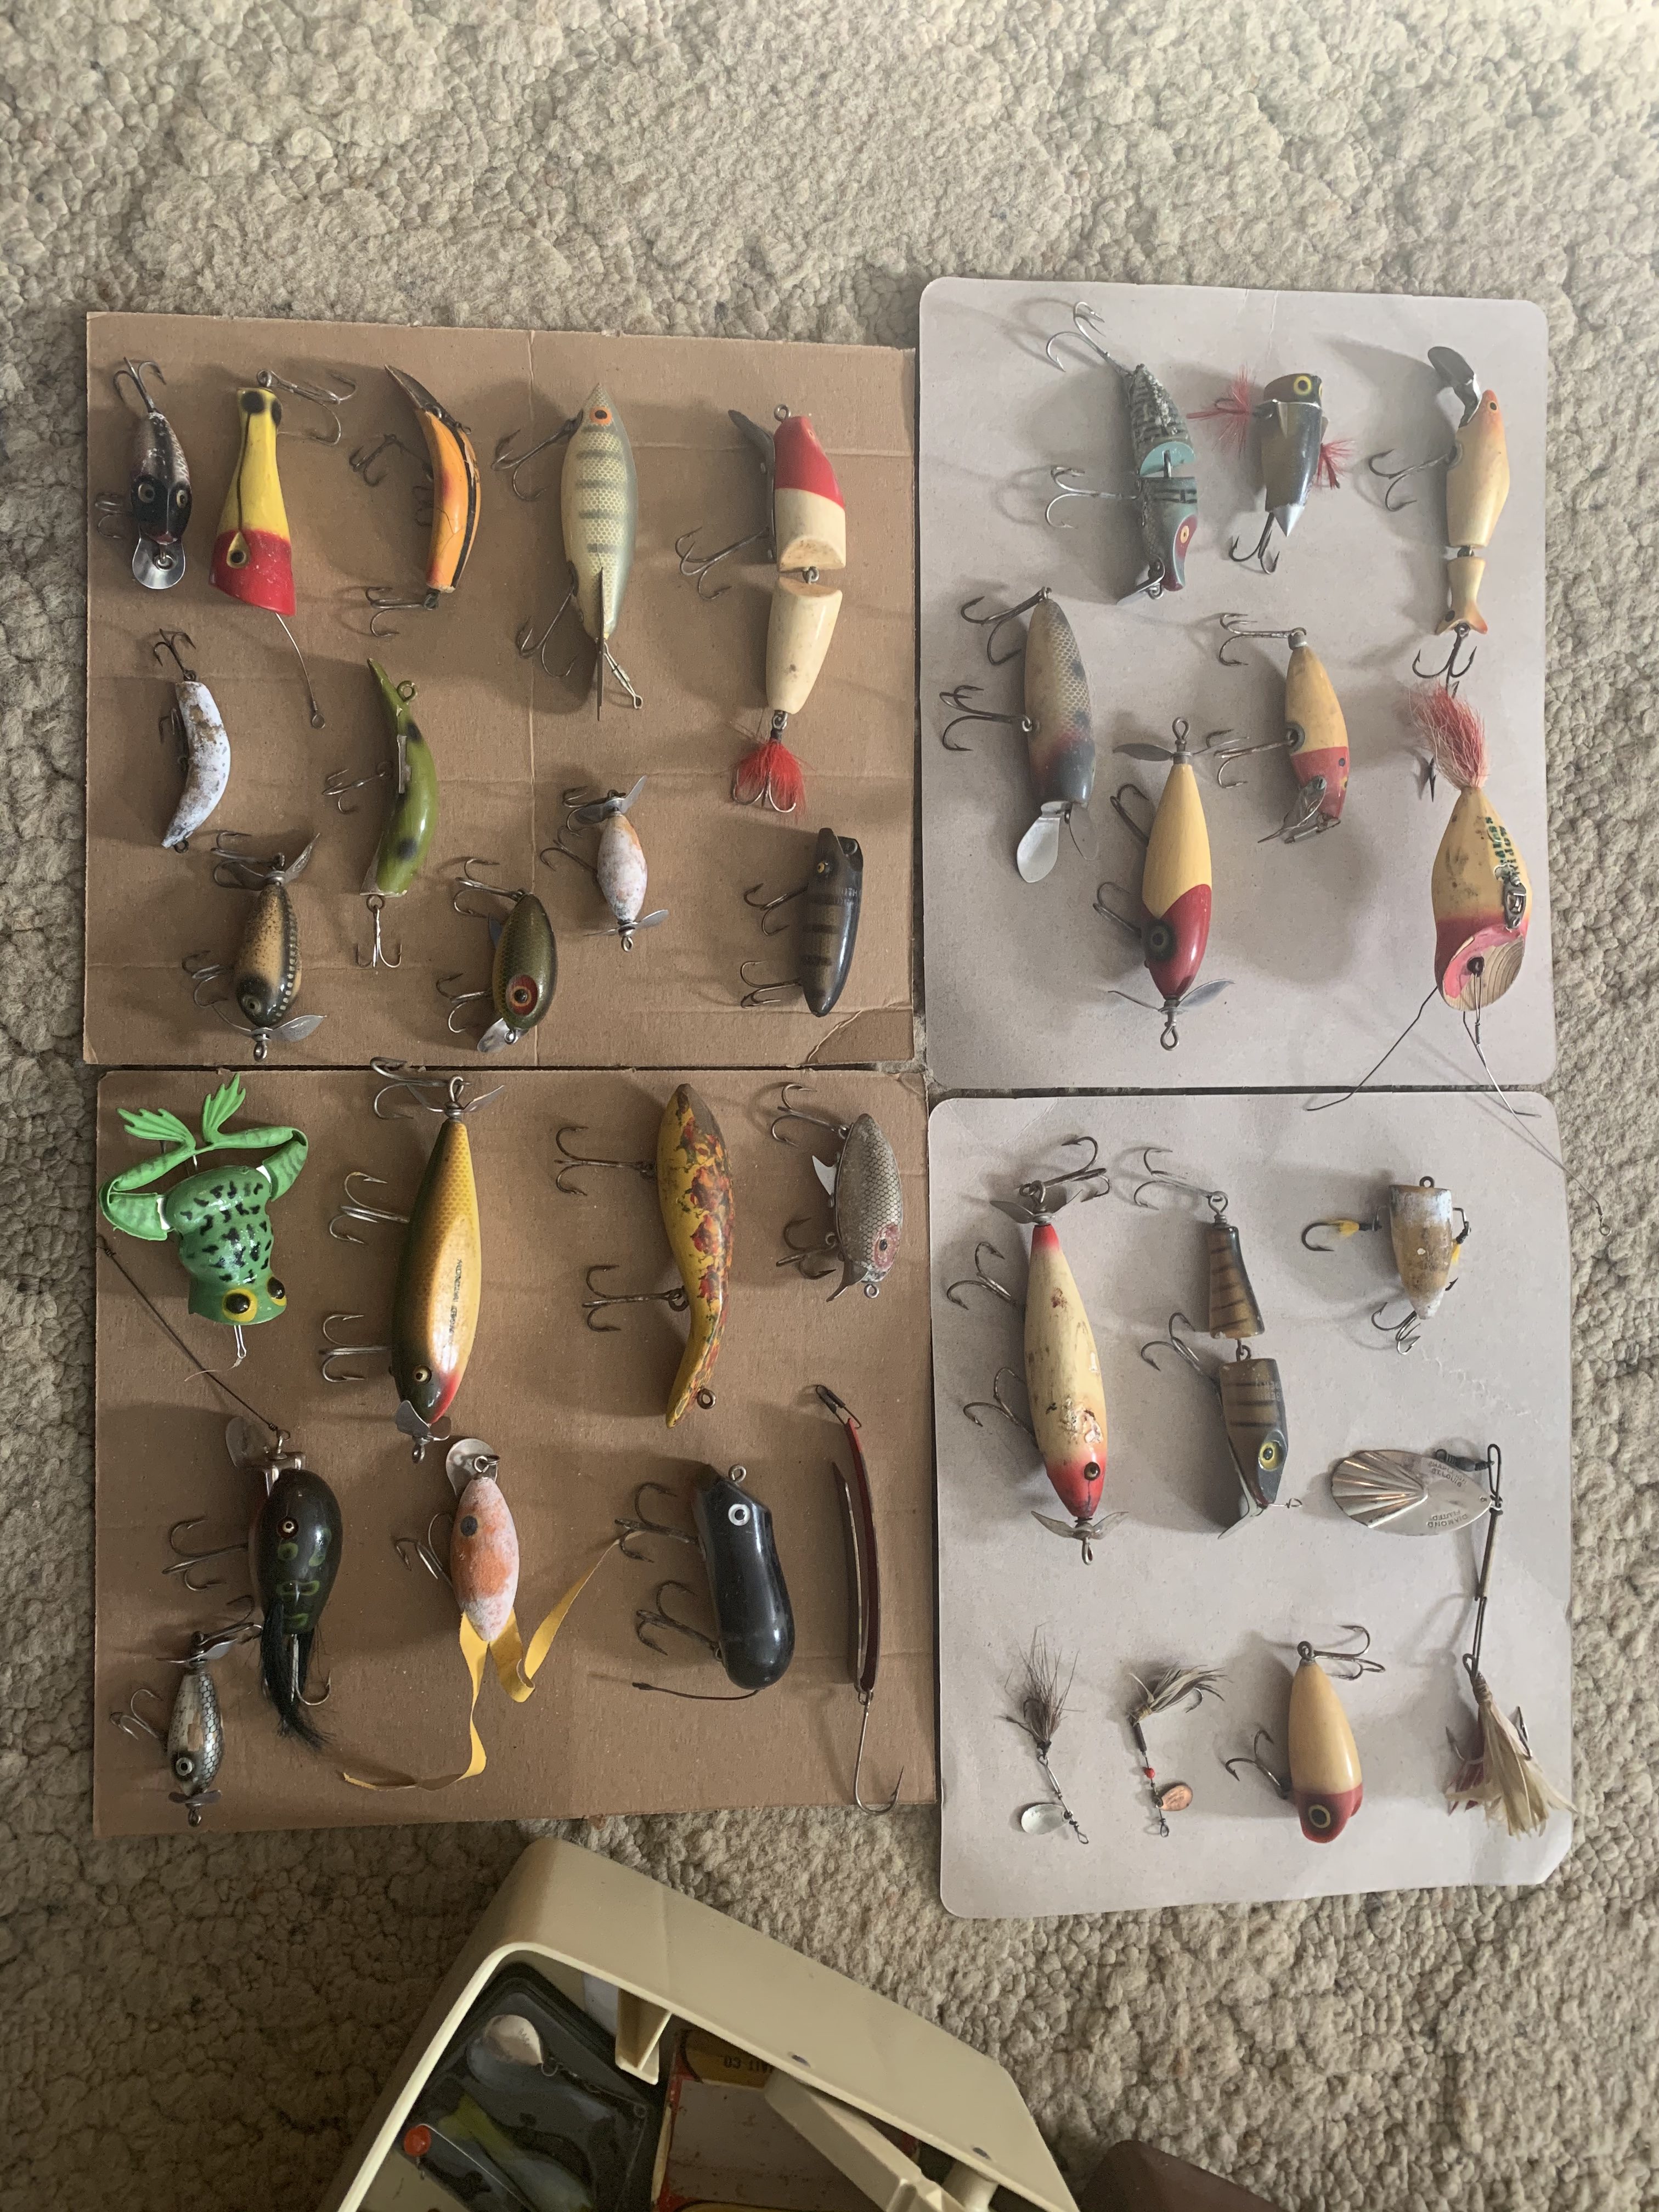 Lure display board ideas - General Discussion Forum - General Discussion  Forum